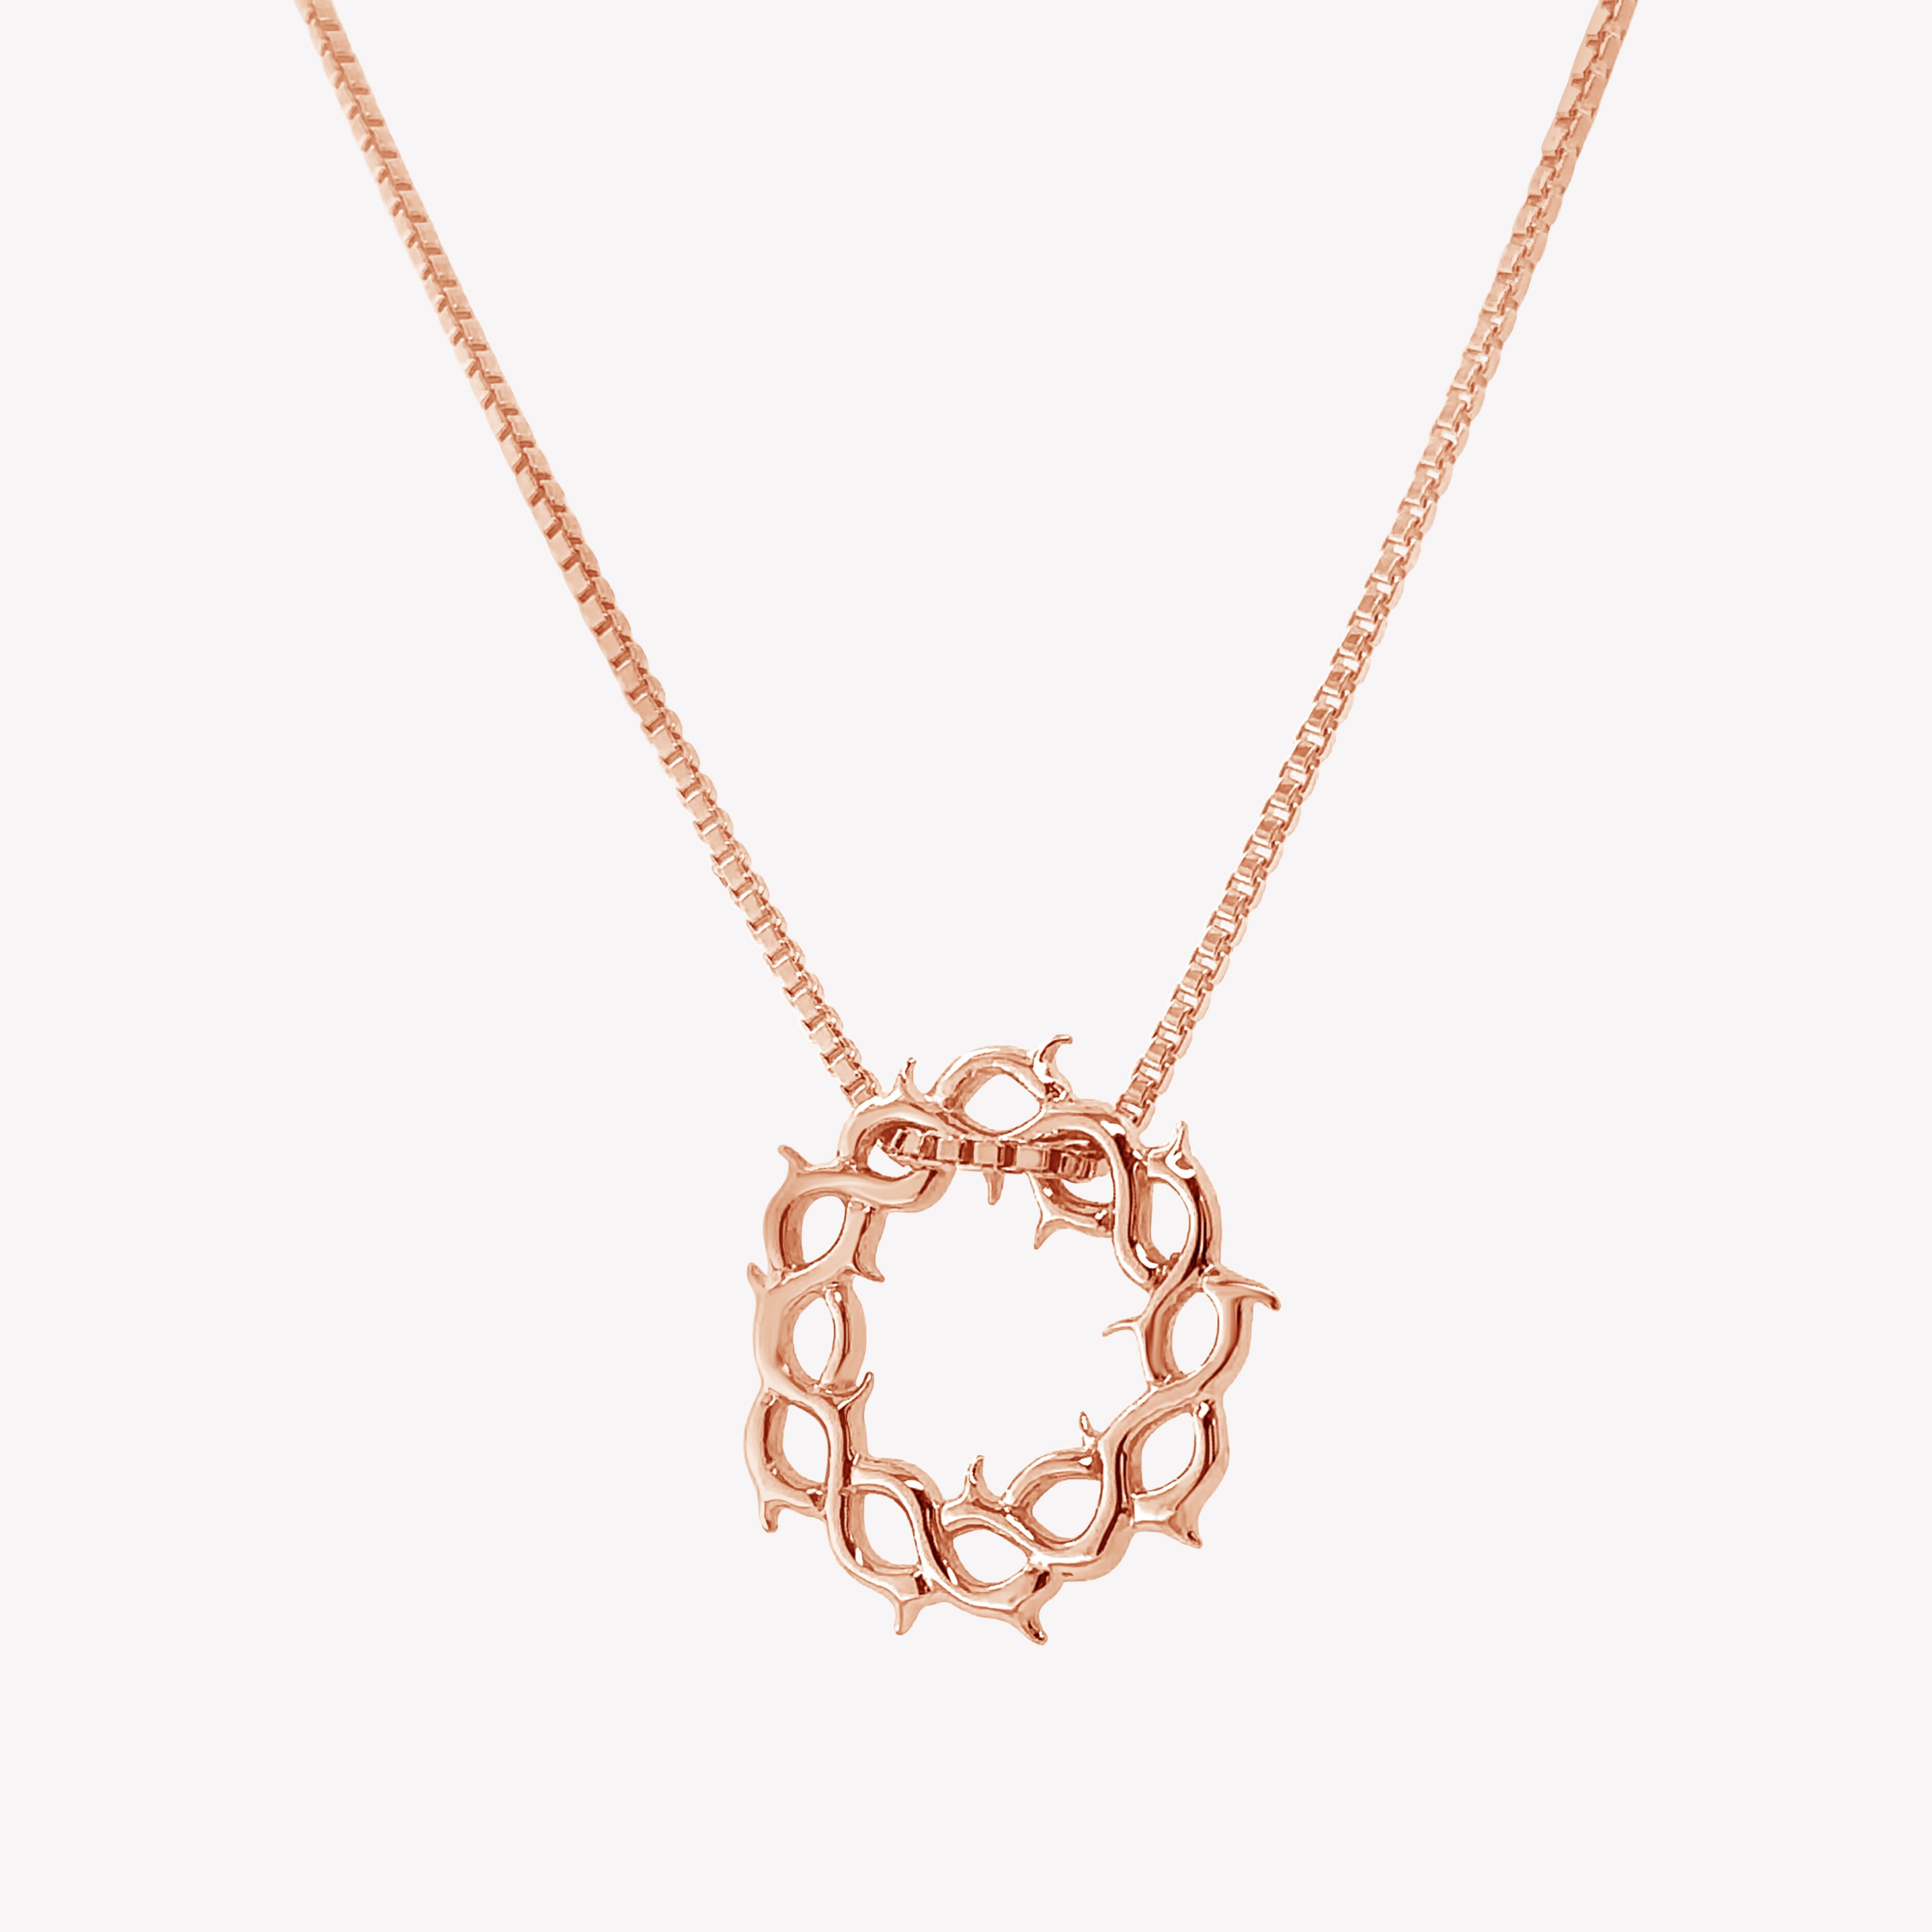 Rose gold vermeil Crown of Thorns Necklace by Rizen Jewelry. Box chain threaded through faith inspired crown of thorns pendant with Cross Tag.